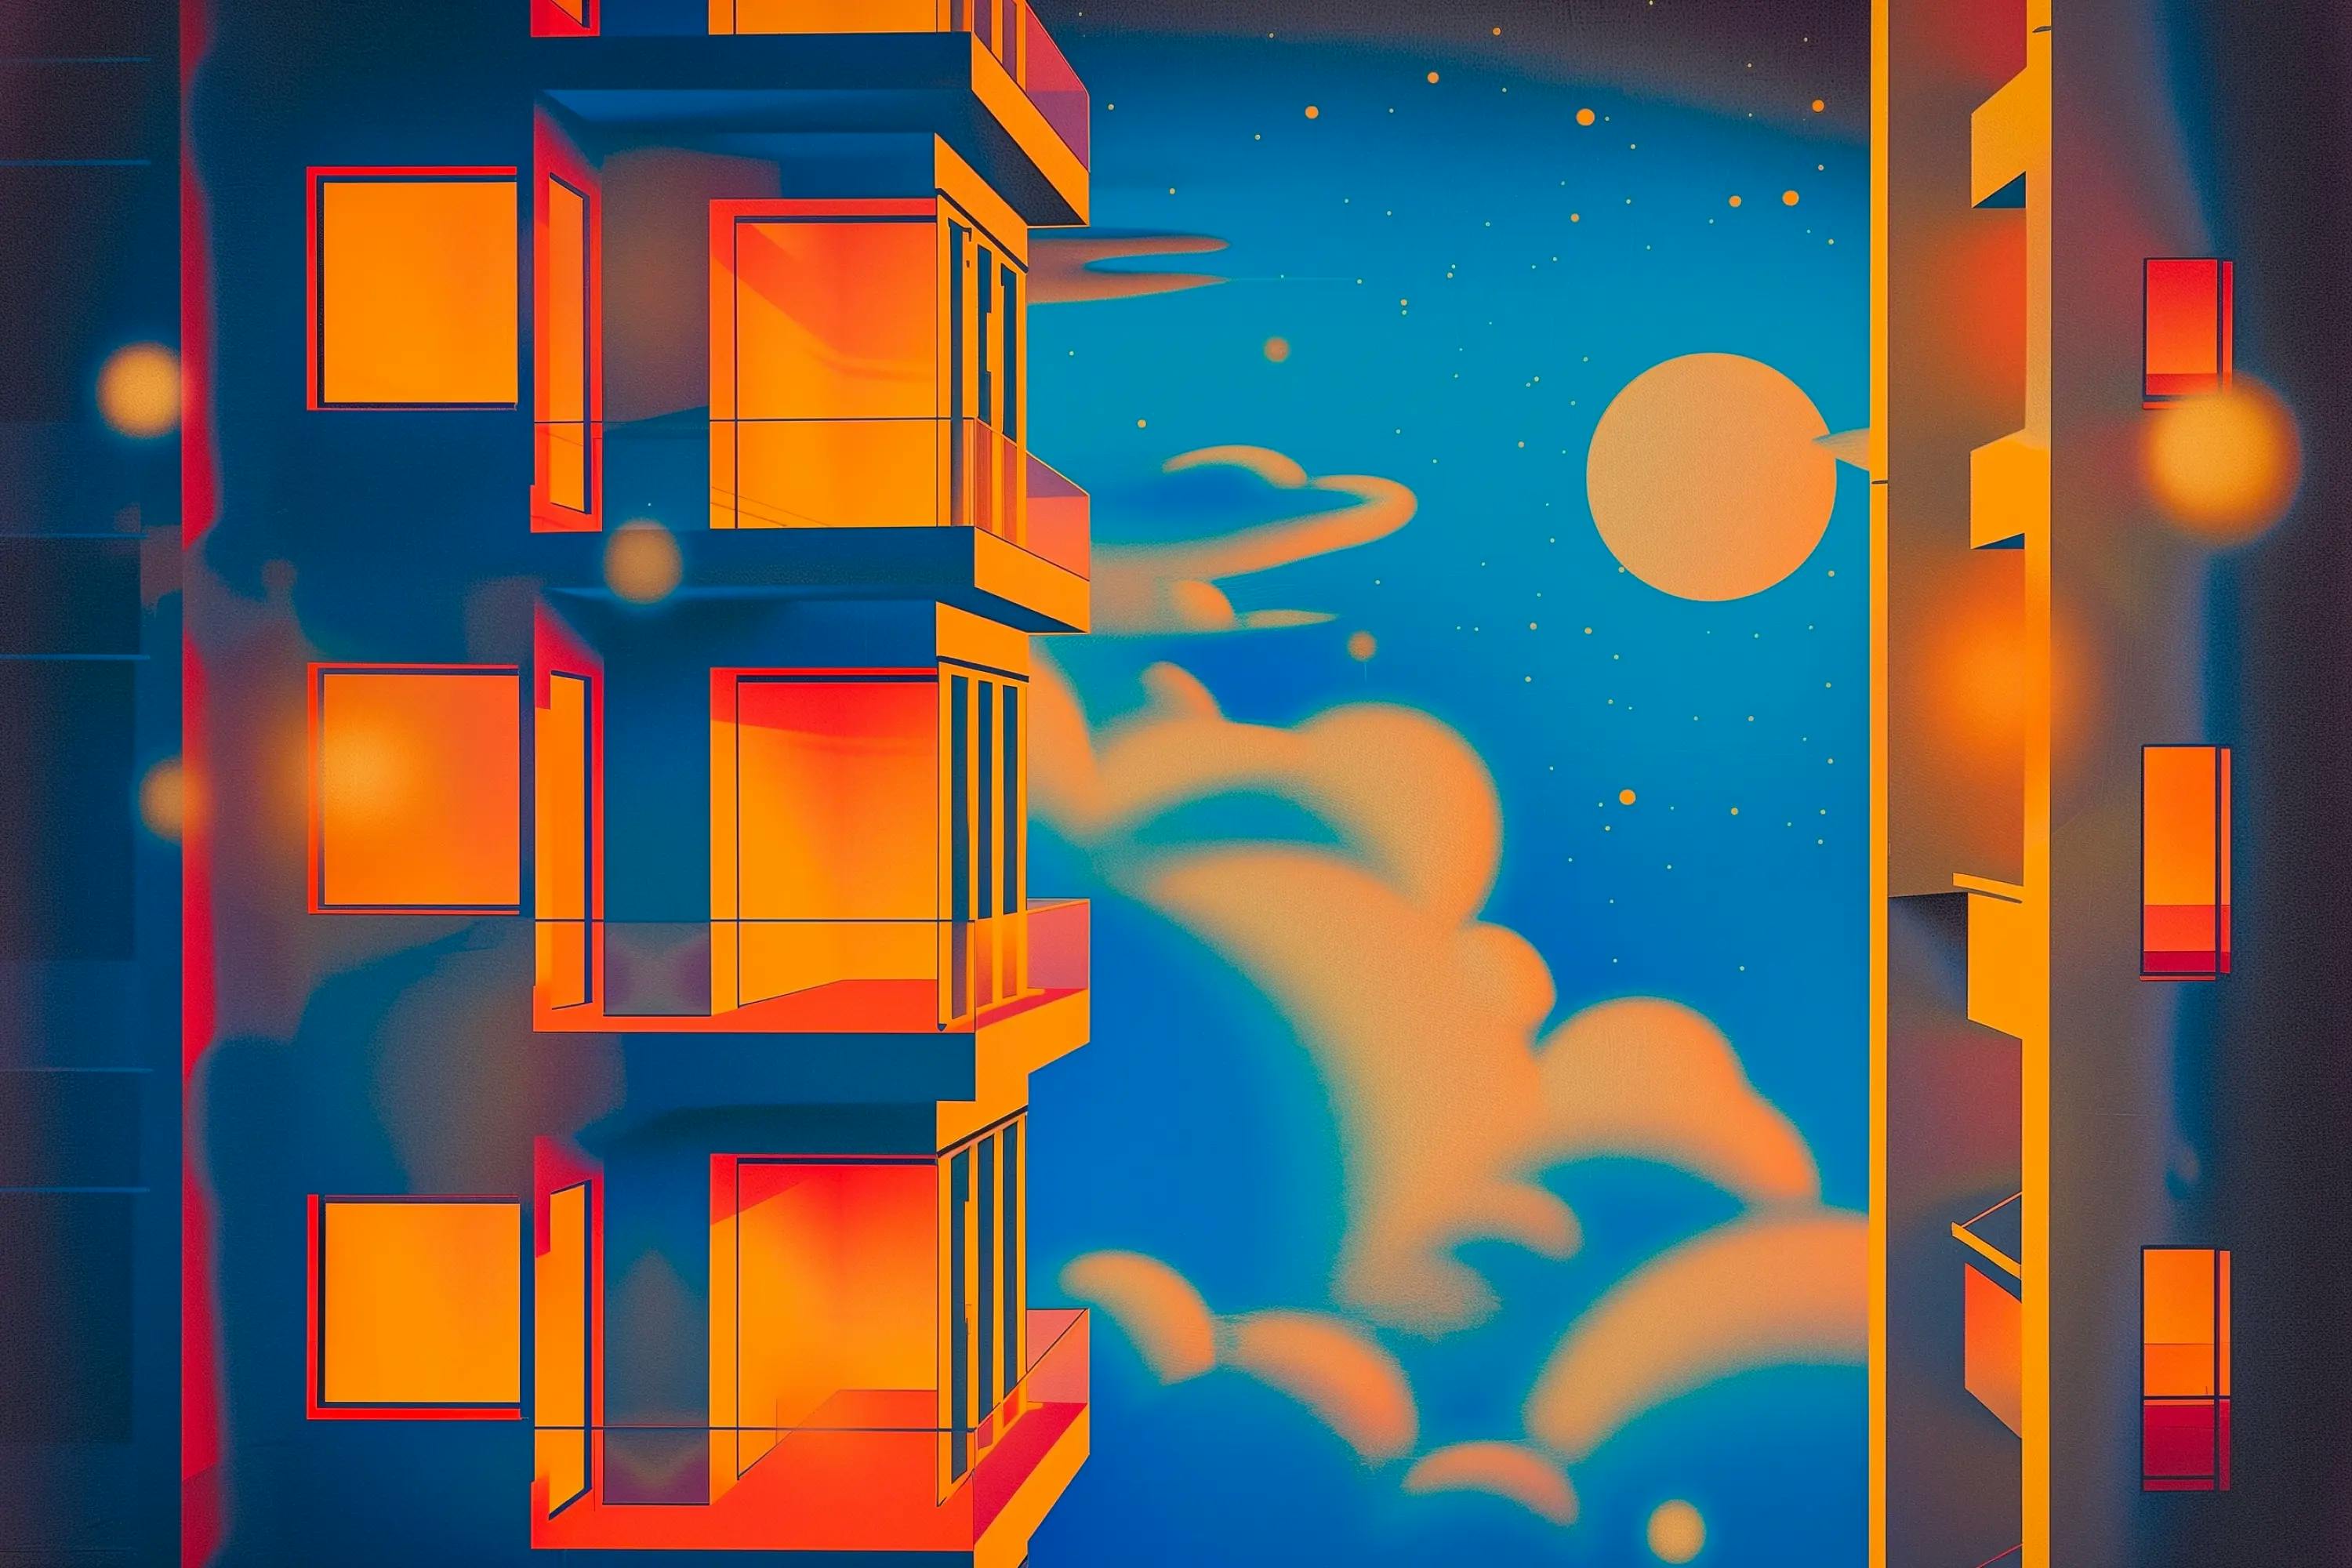 Illustration of apartment buildings against a nighttime sky